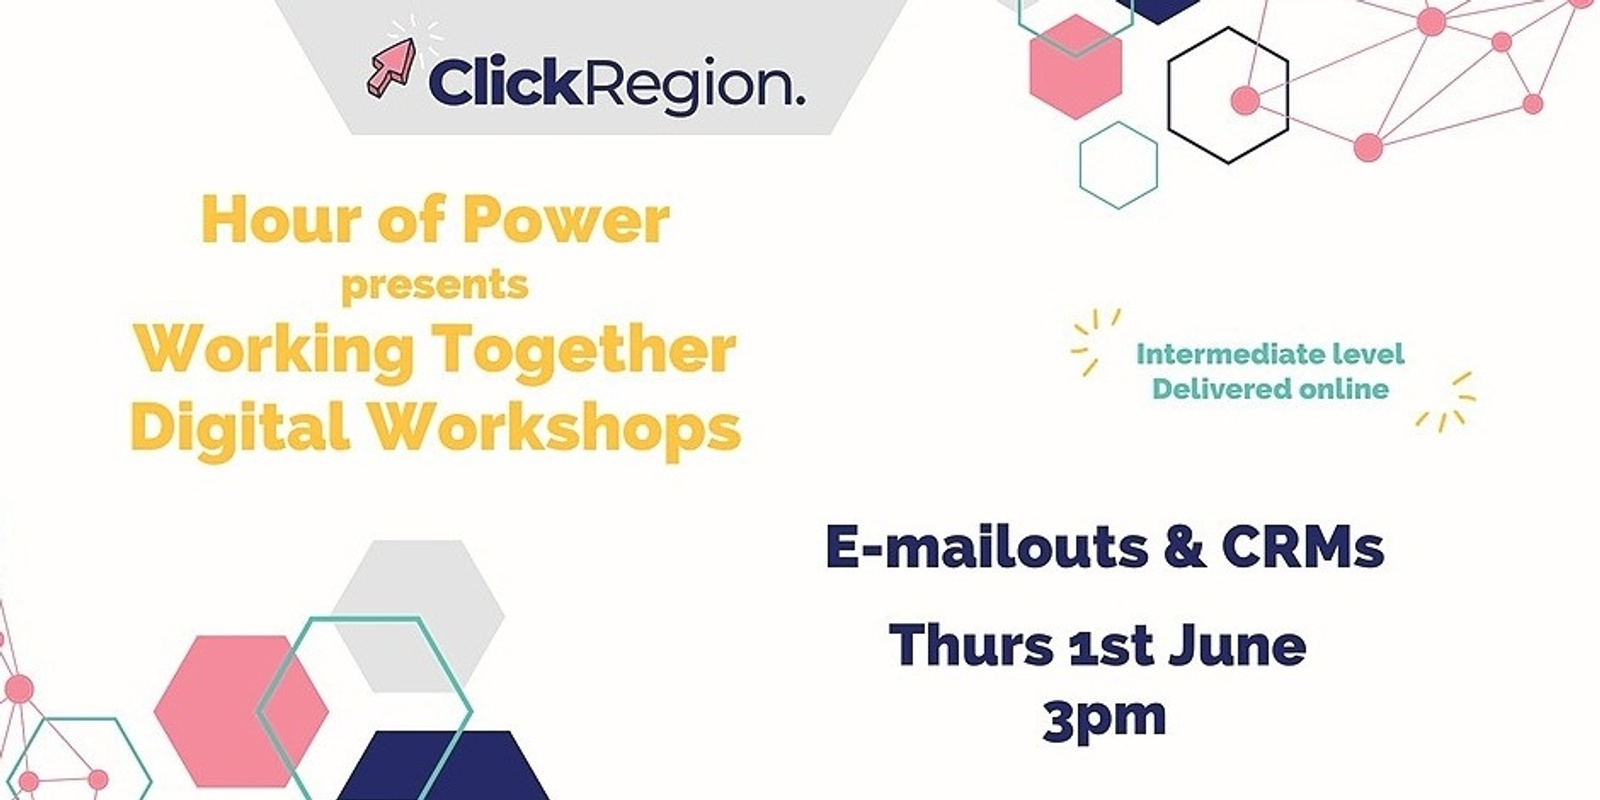 Emailouts & CRMs (Customer Relationship Management) - Working Together Program/Hour of Power